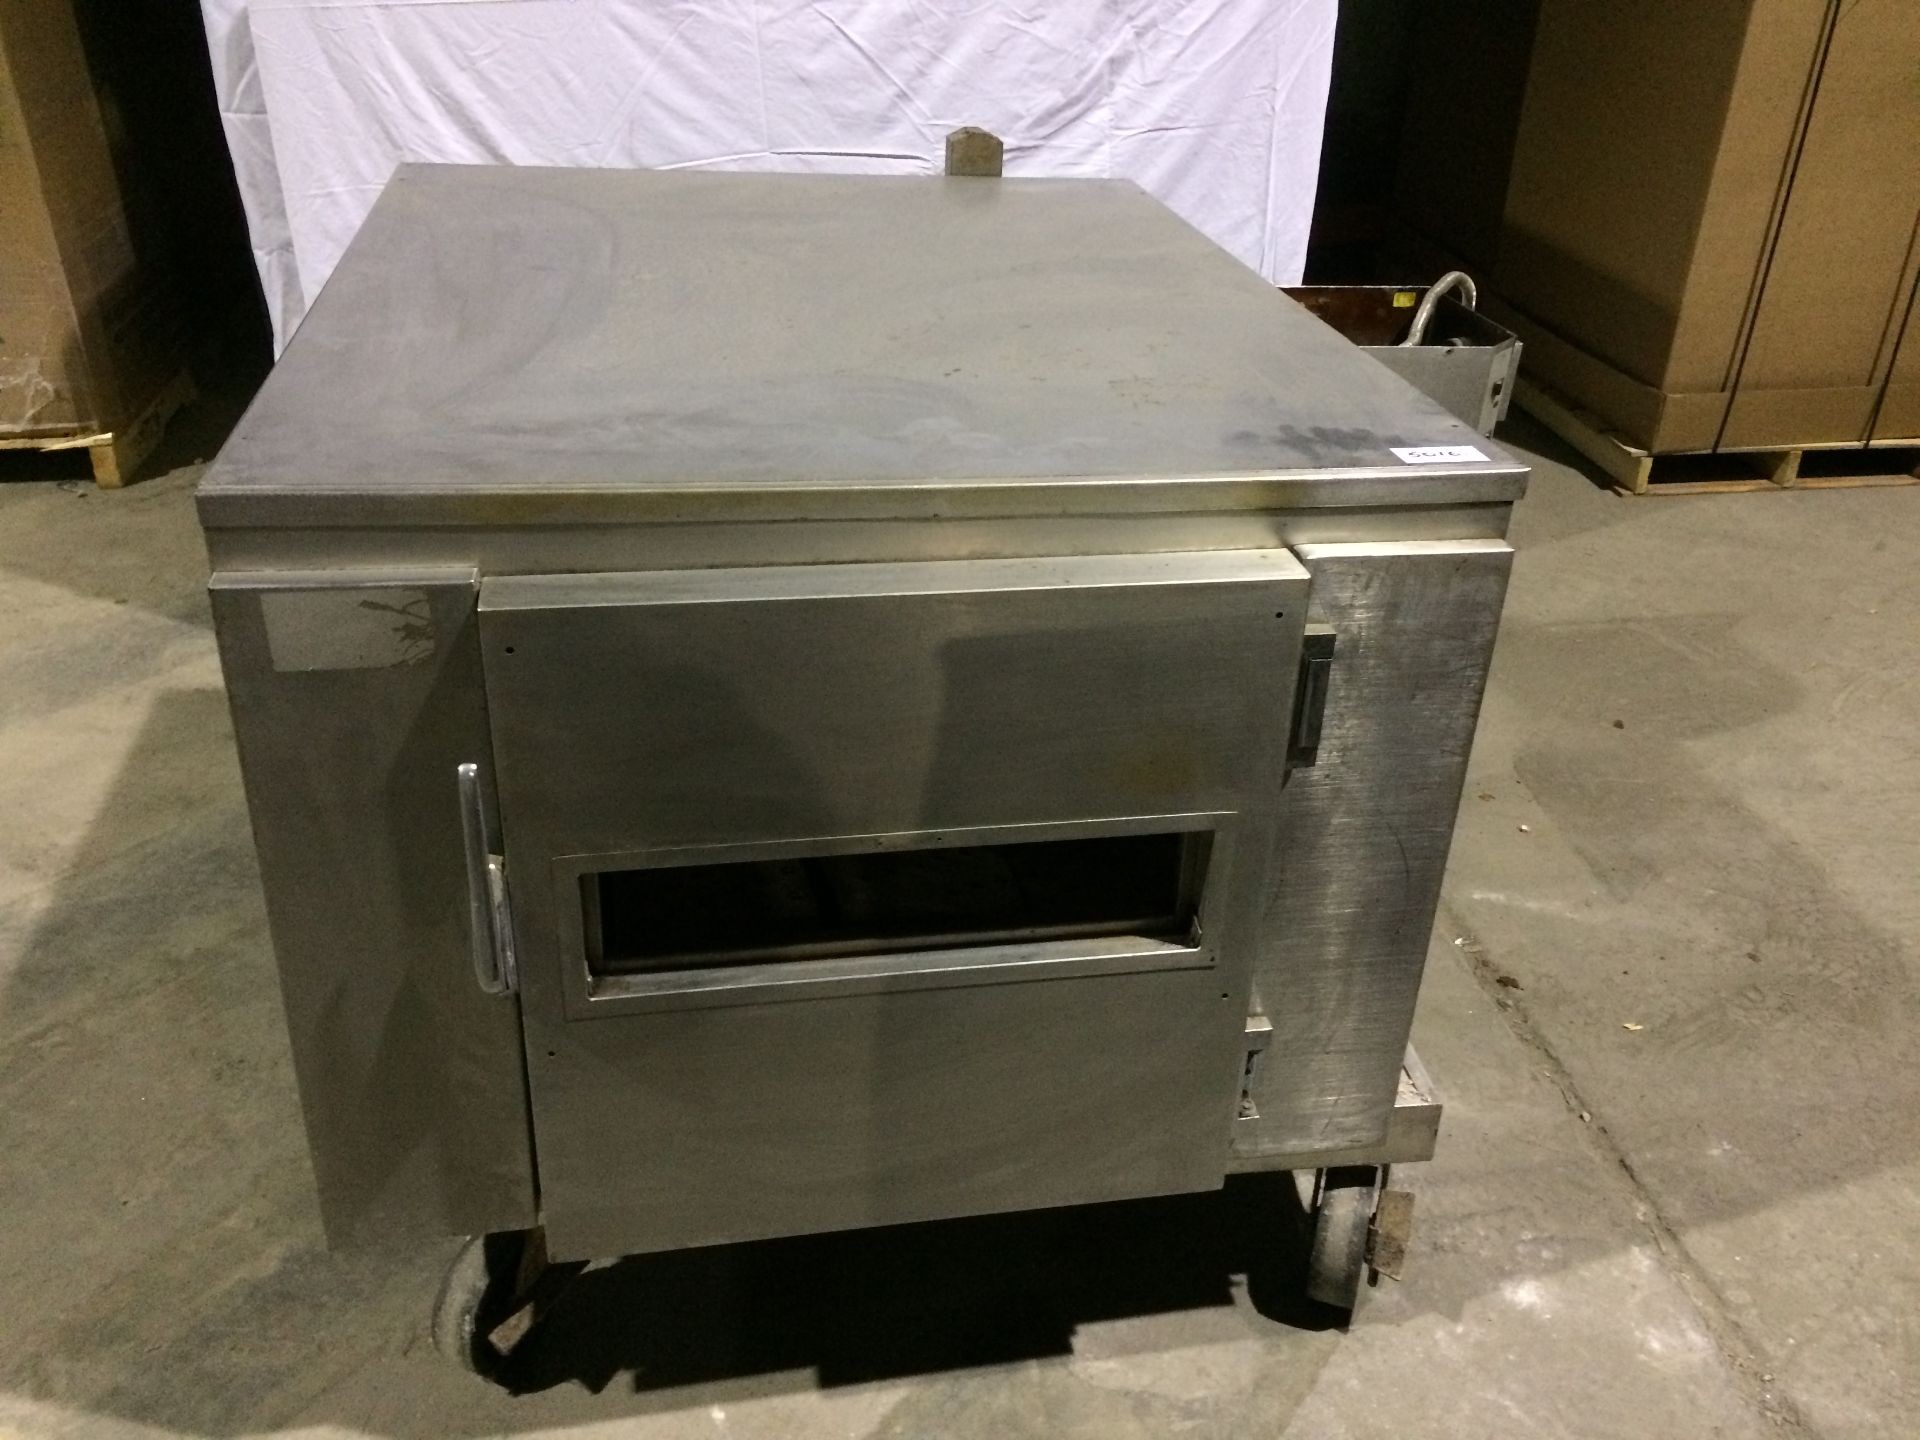 Conveyor Pizza Oven - as isParts Purchase or refurb required